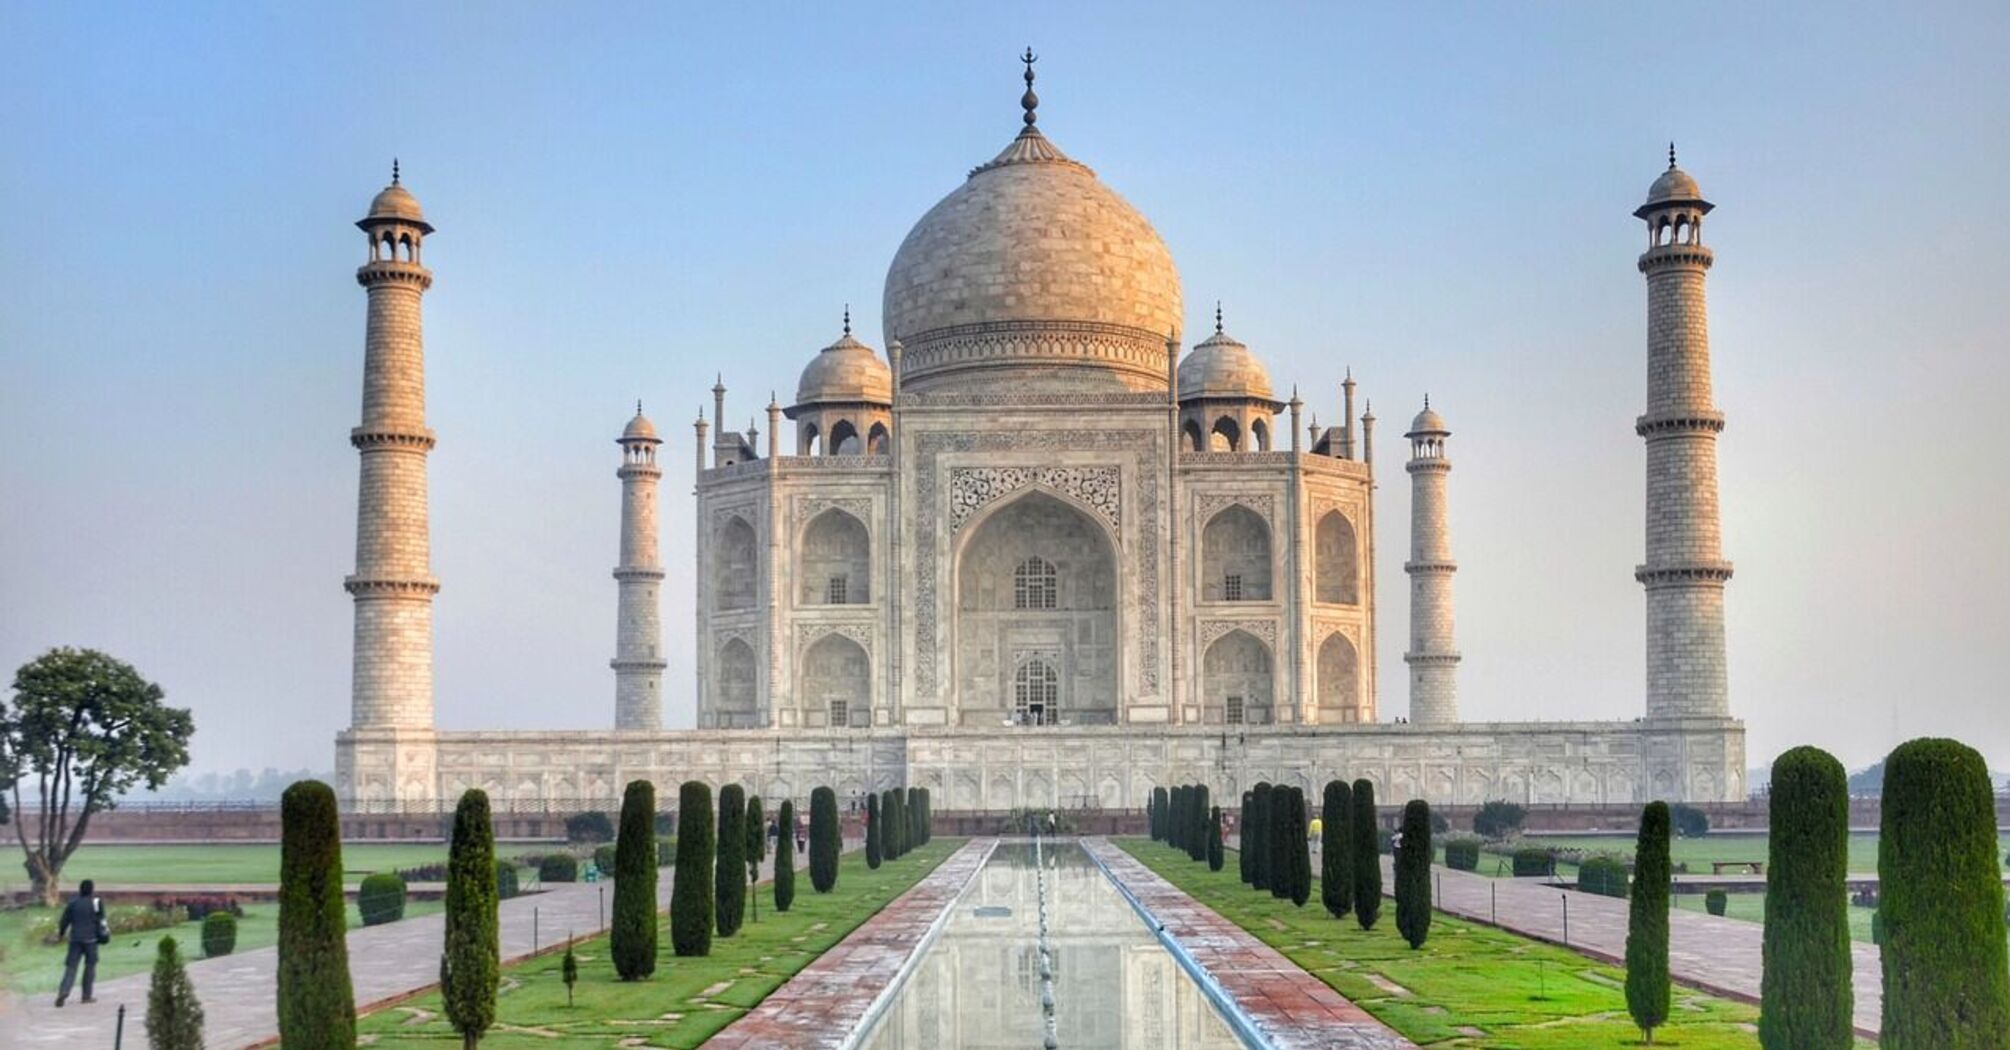 Explore the most photographed tourist destinations in India